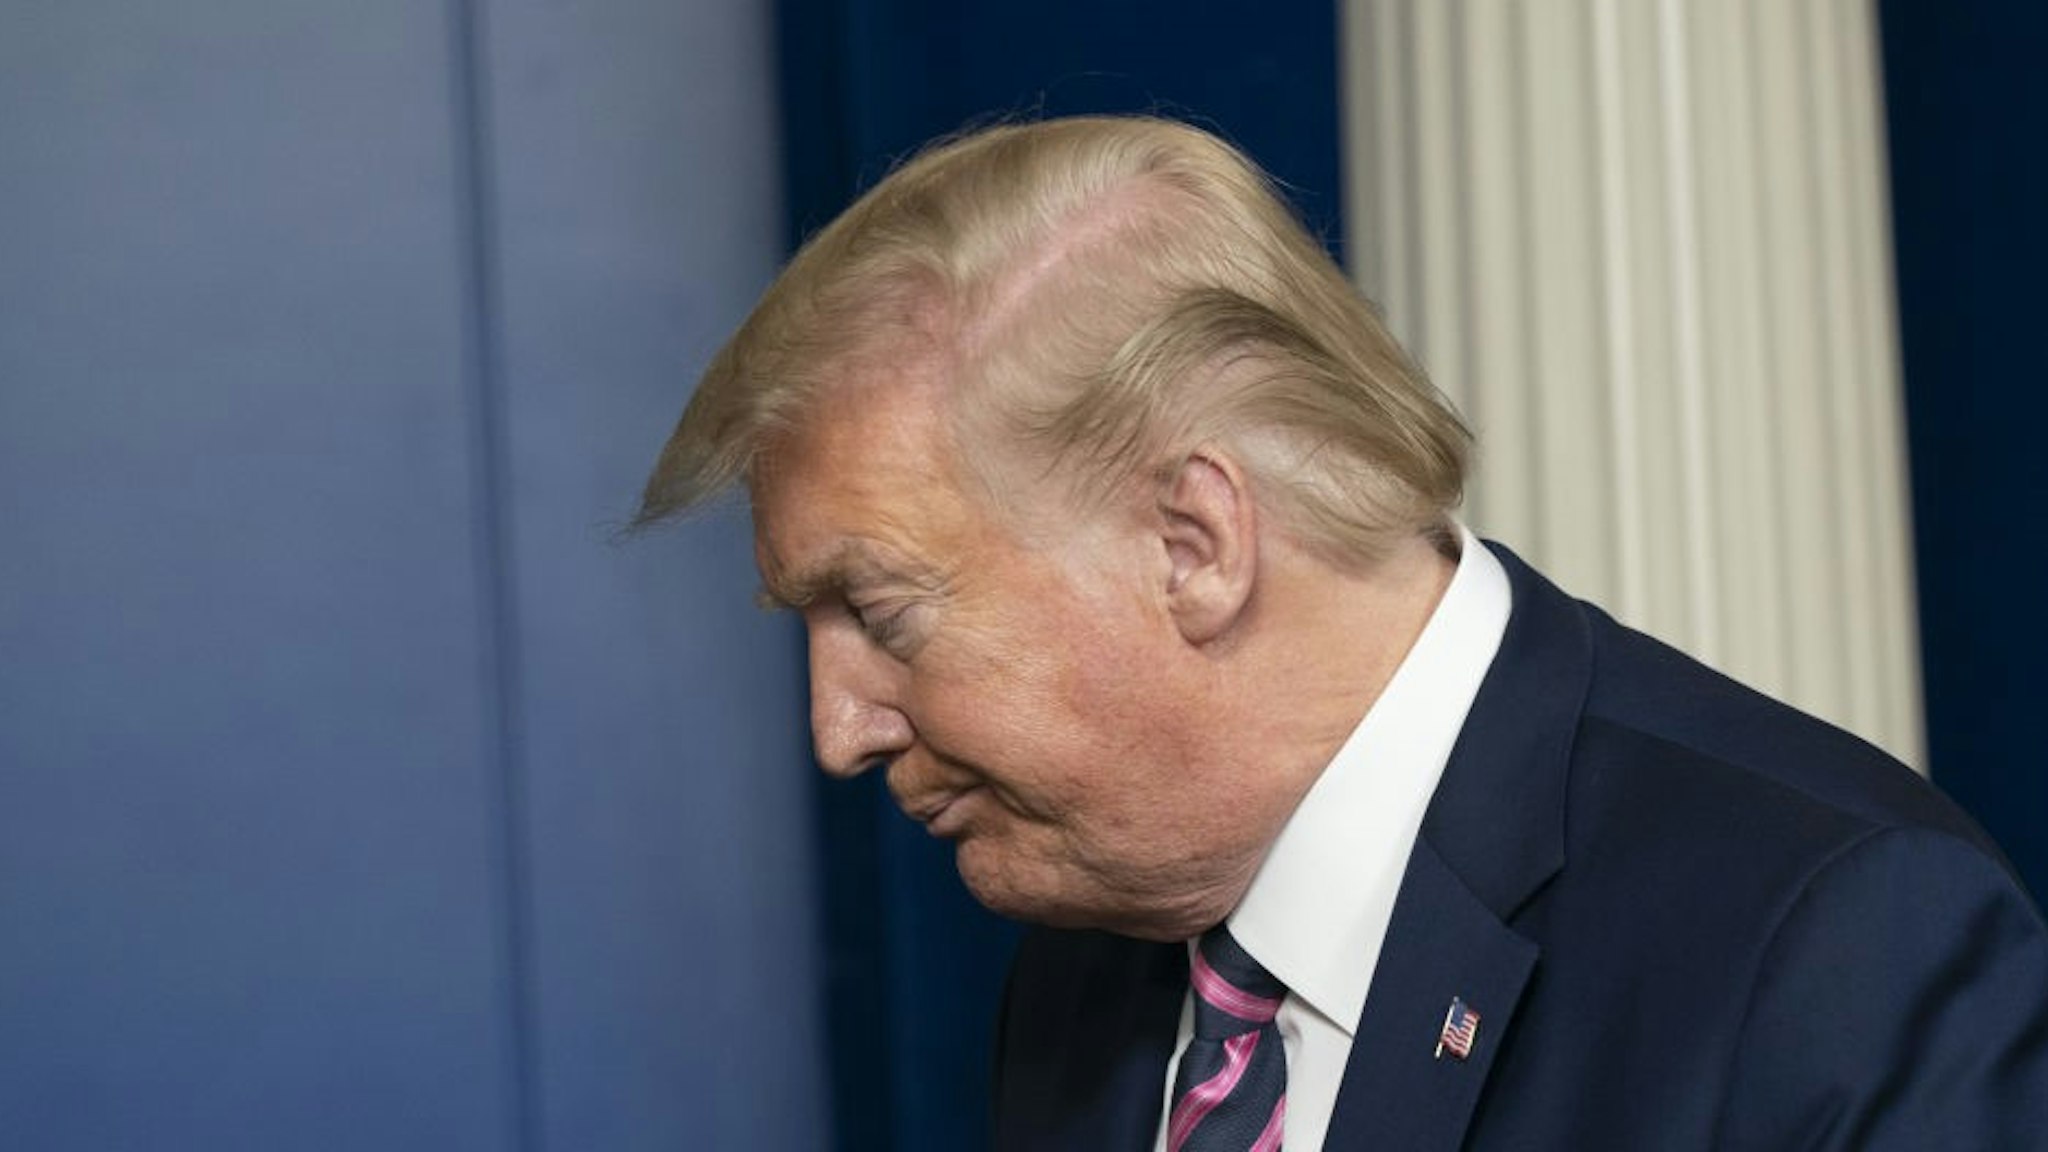 U.S. President Donald Trump leaves after a news conference in the White House in Washington, D.C., U.S., on Friday, April 24, 2020. Trump has been determined to talk his way through the coronavirus crisis, but his frequent misstatements at his daily news conferences have caused a litany of public health and political headaches for the White House. Photographer: